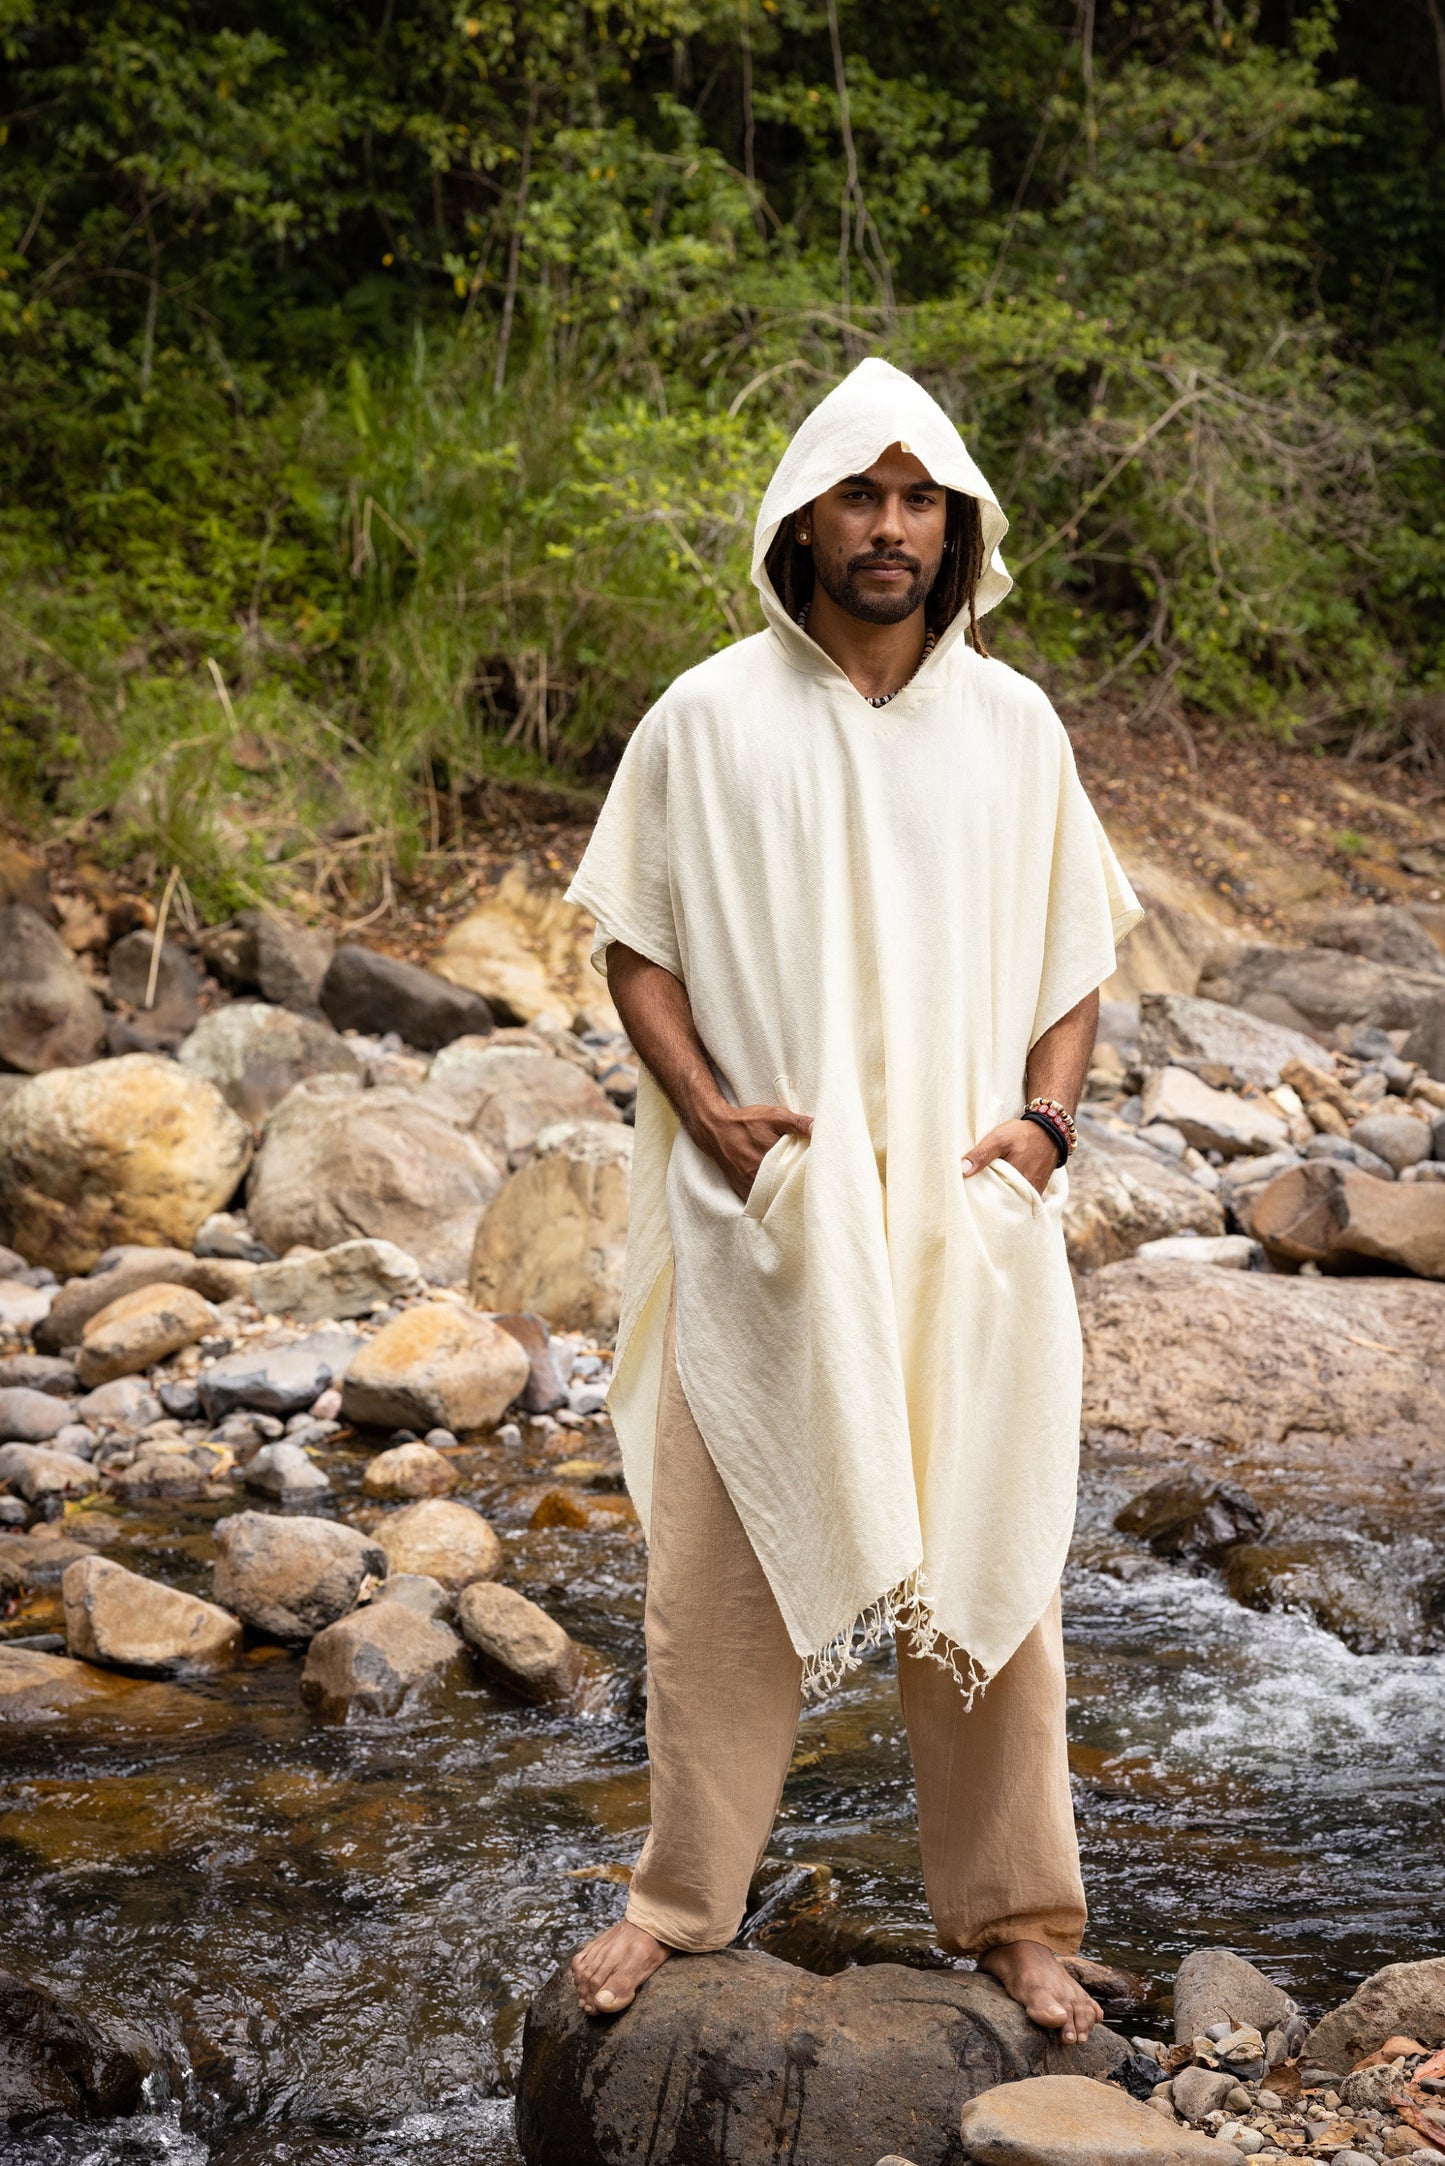 Our SAHAJI Poncho is carefully handwoven and made from 100% pure wool in an ancient traditional process without machinery, which makes every piece unique and personal.